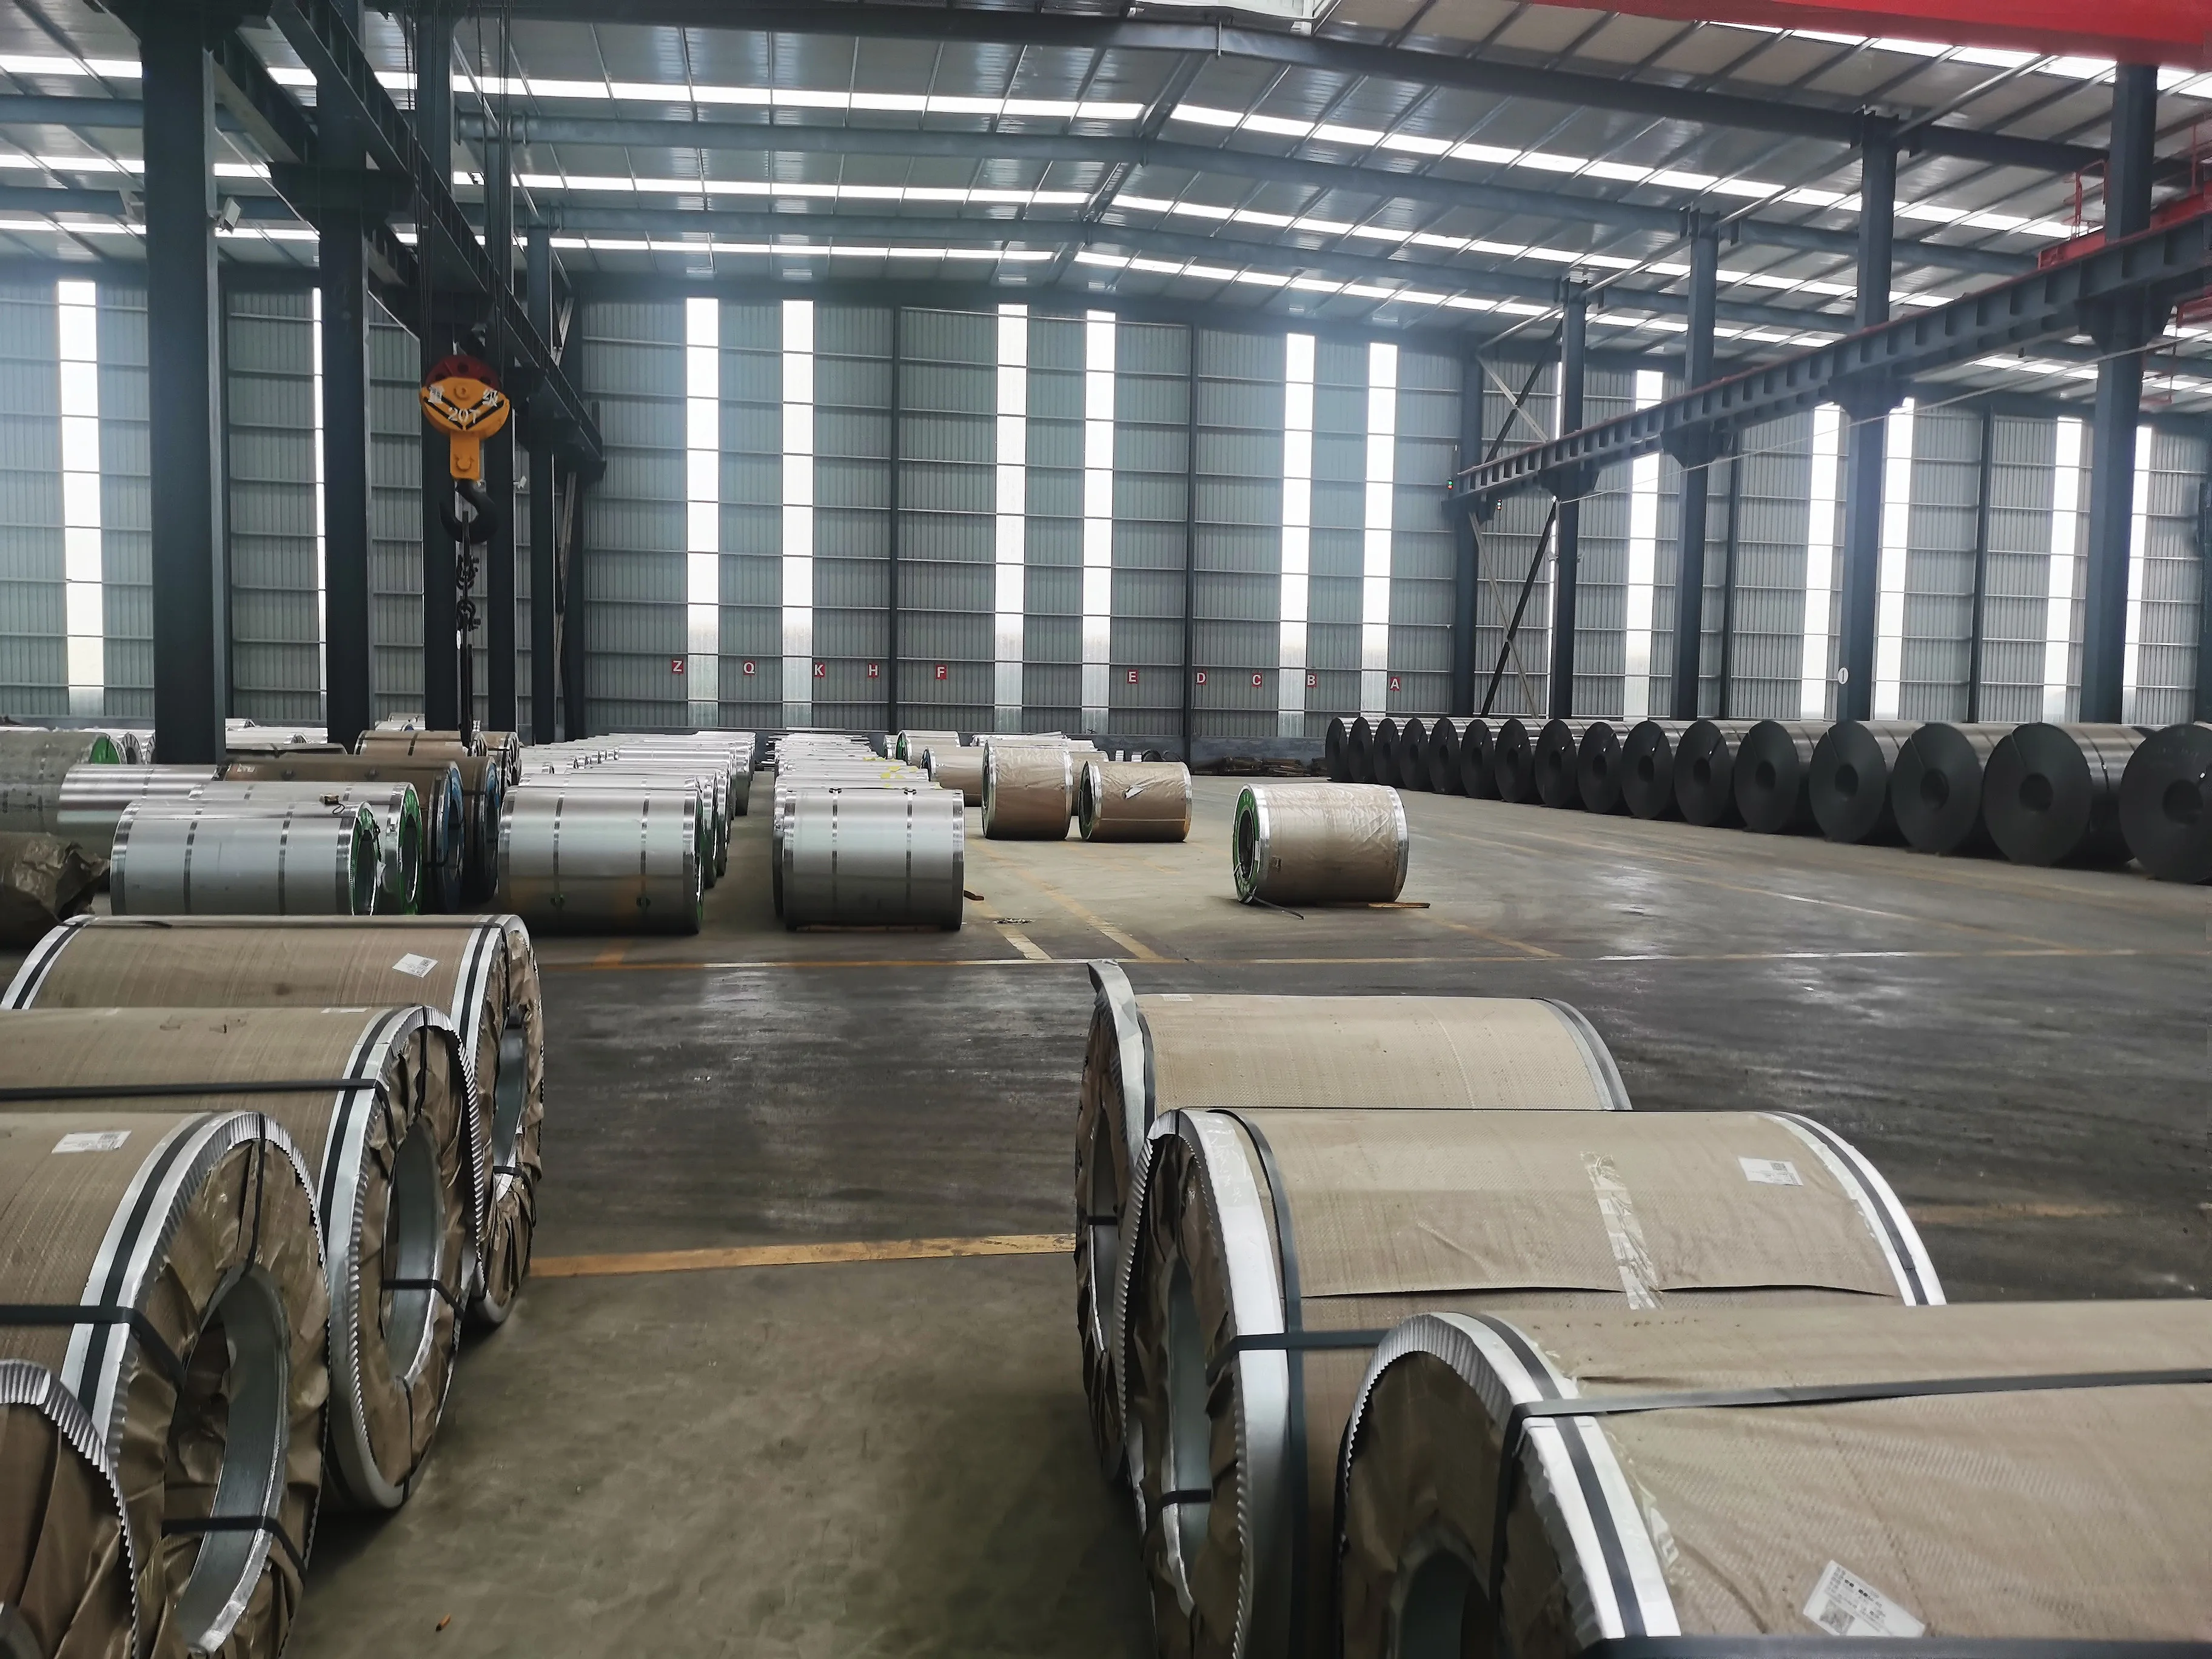 The best-selling galvanized coil in the construction industry in Shandong, China